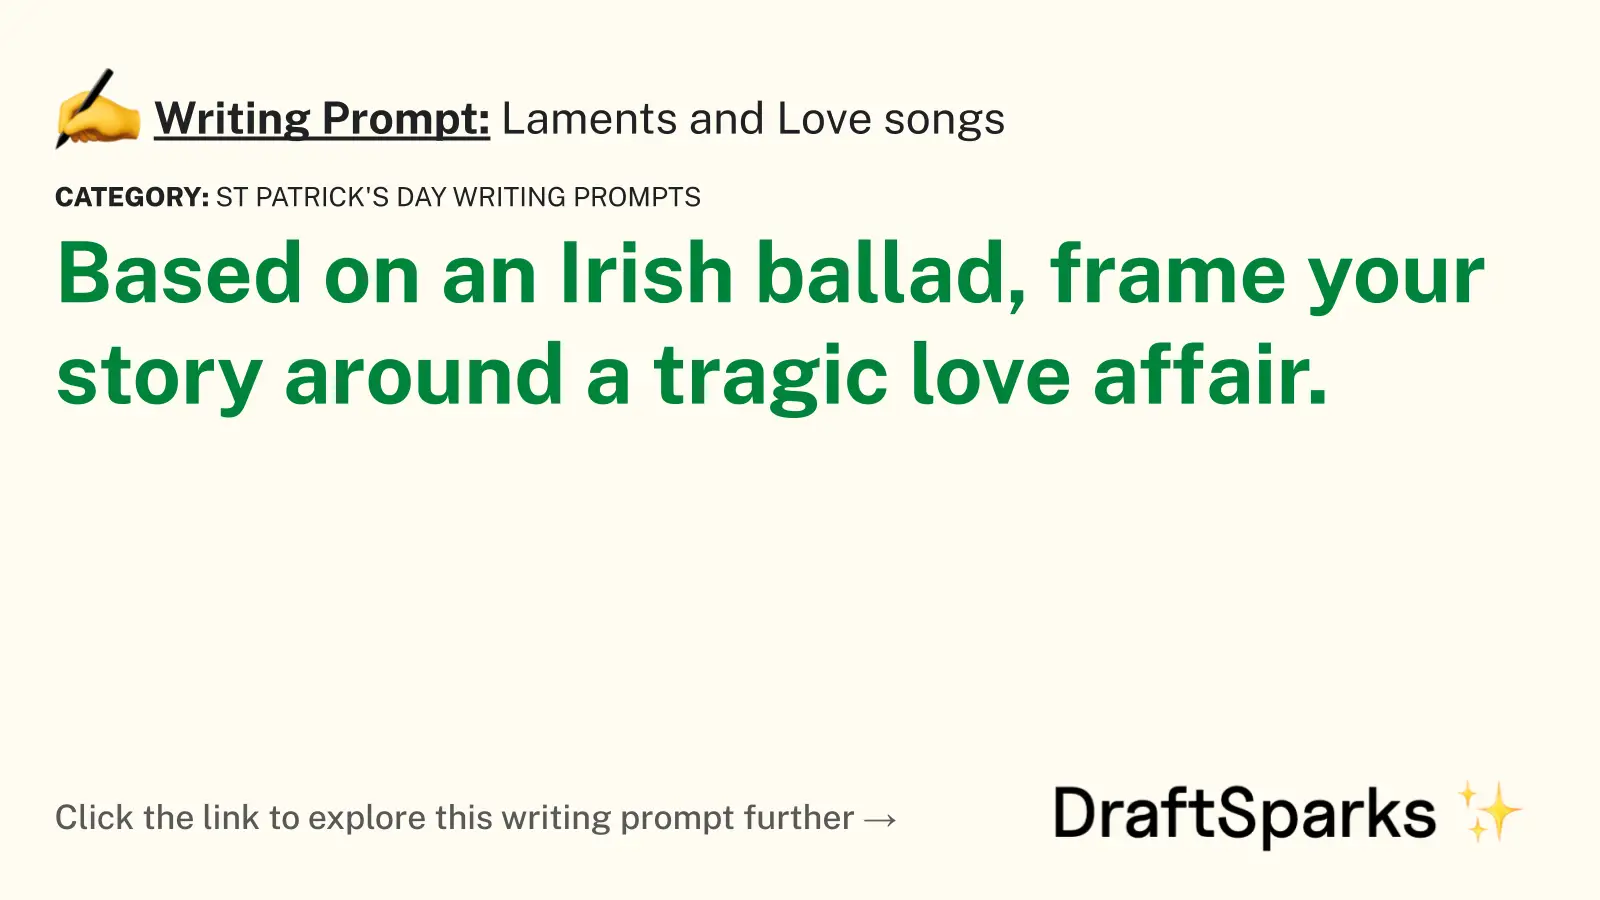 Laments and Love songs